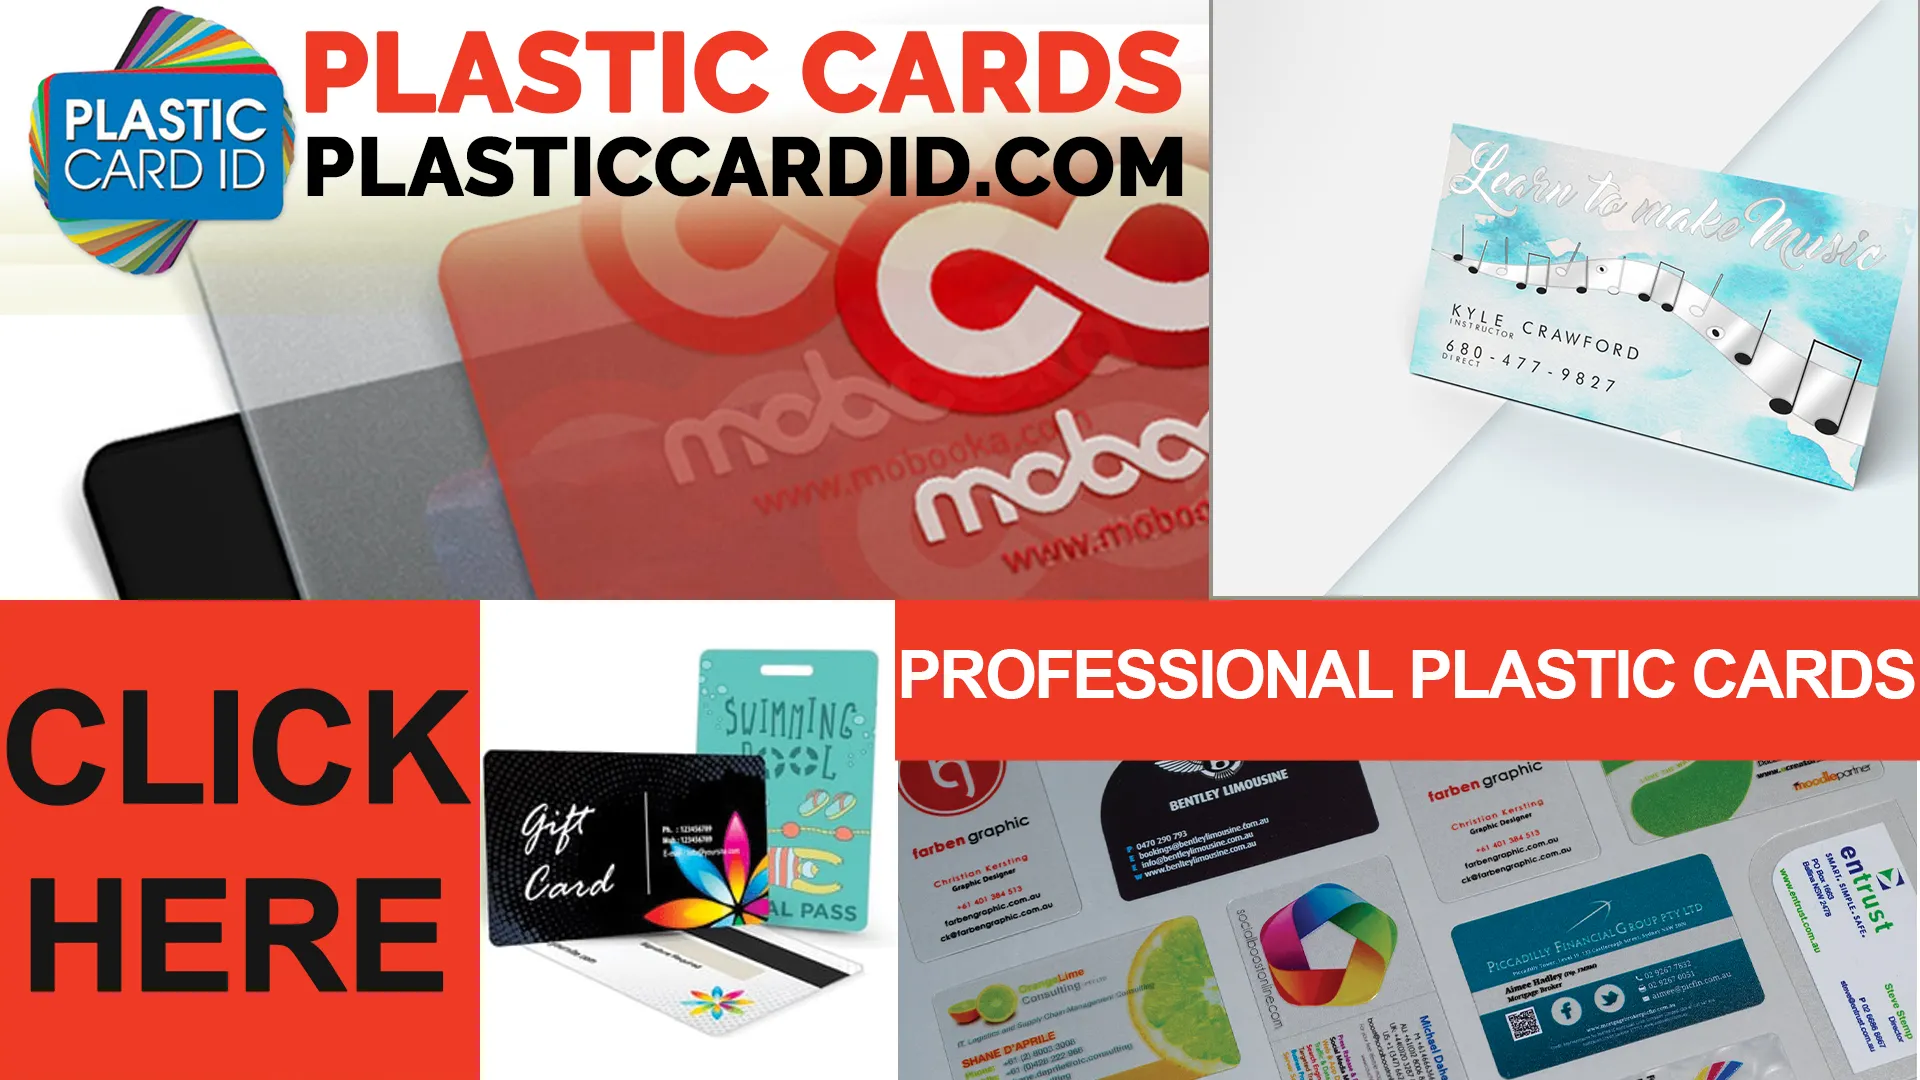  Your Partner in Smart Spending for Plastic Card Projects